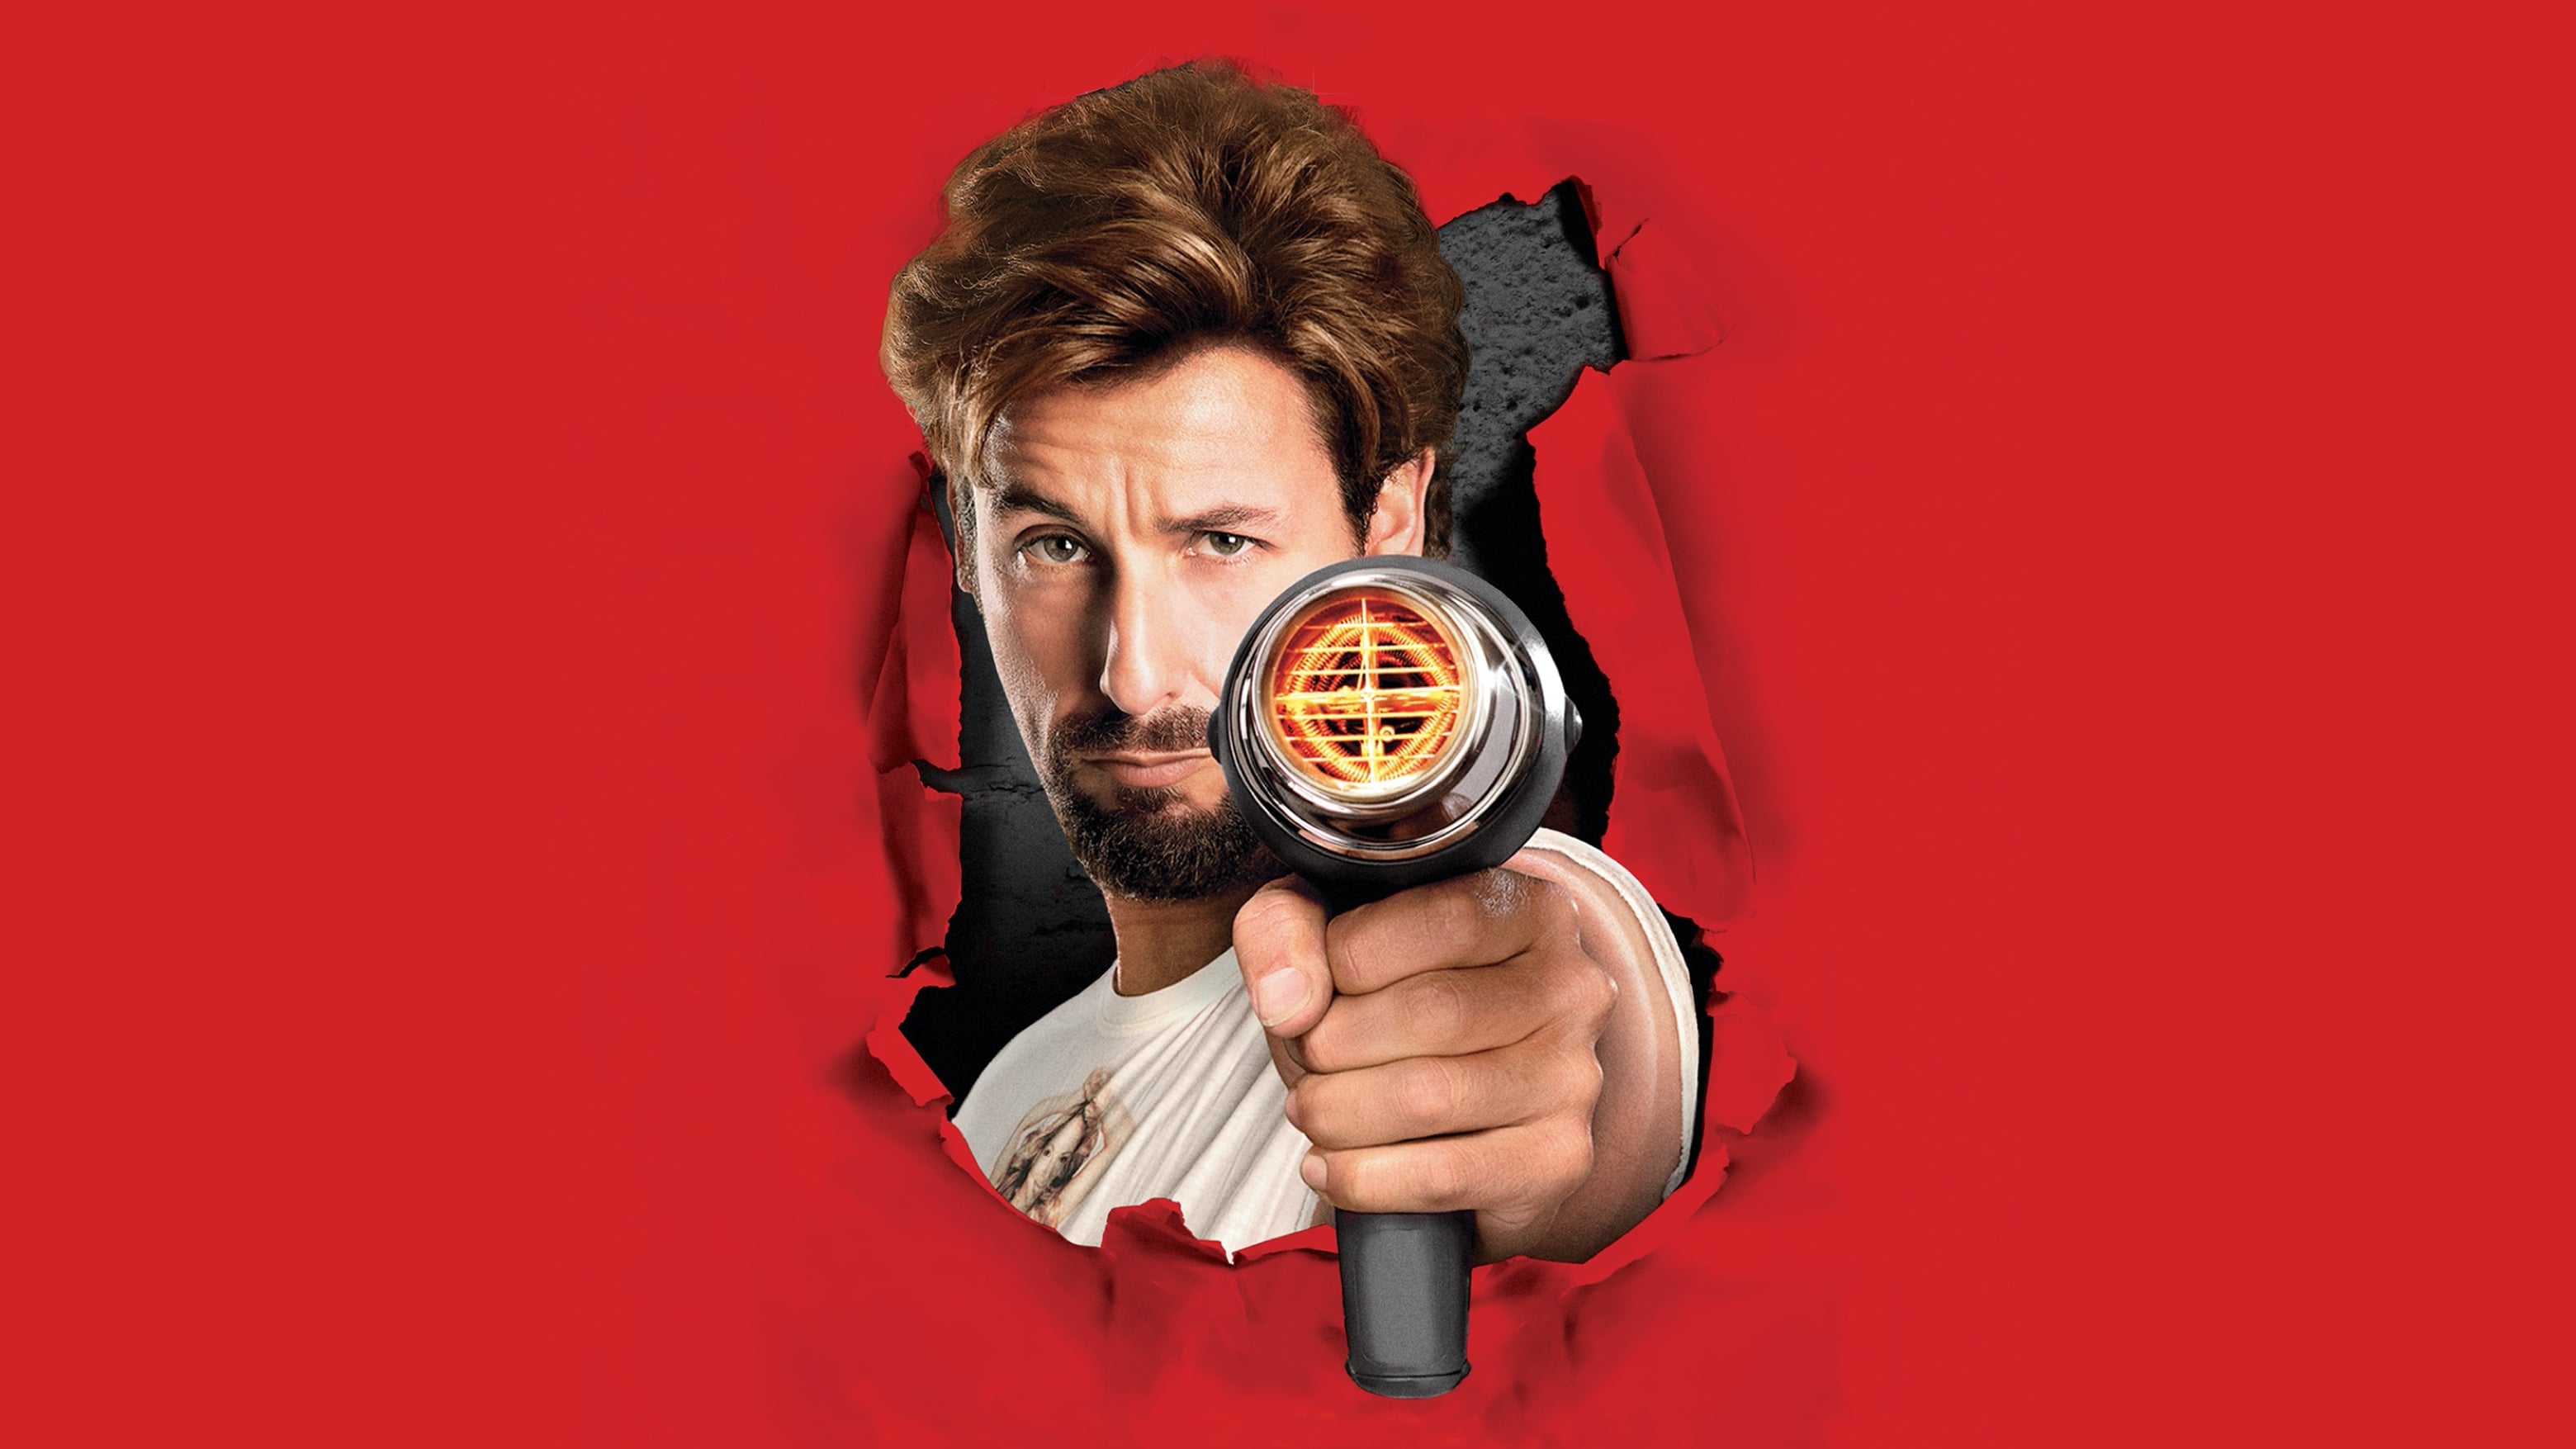 You Don’t Mess with the Zohan 2008 123movies